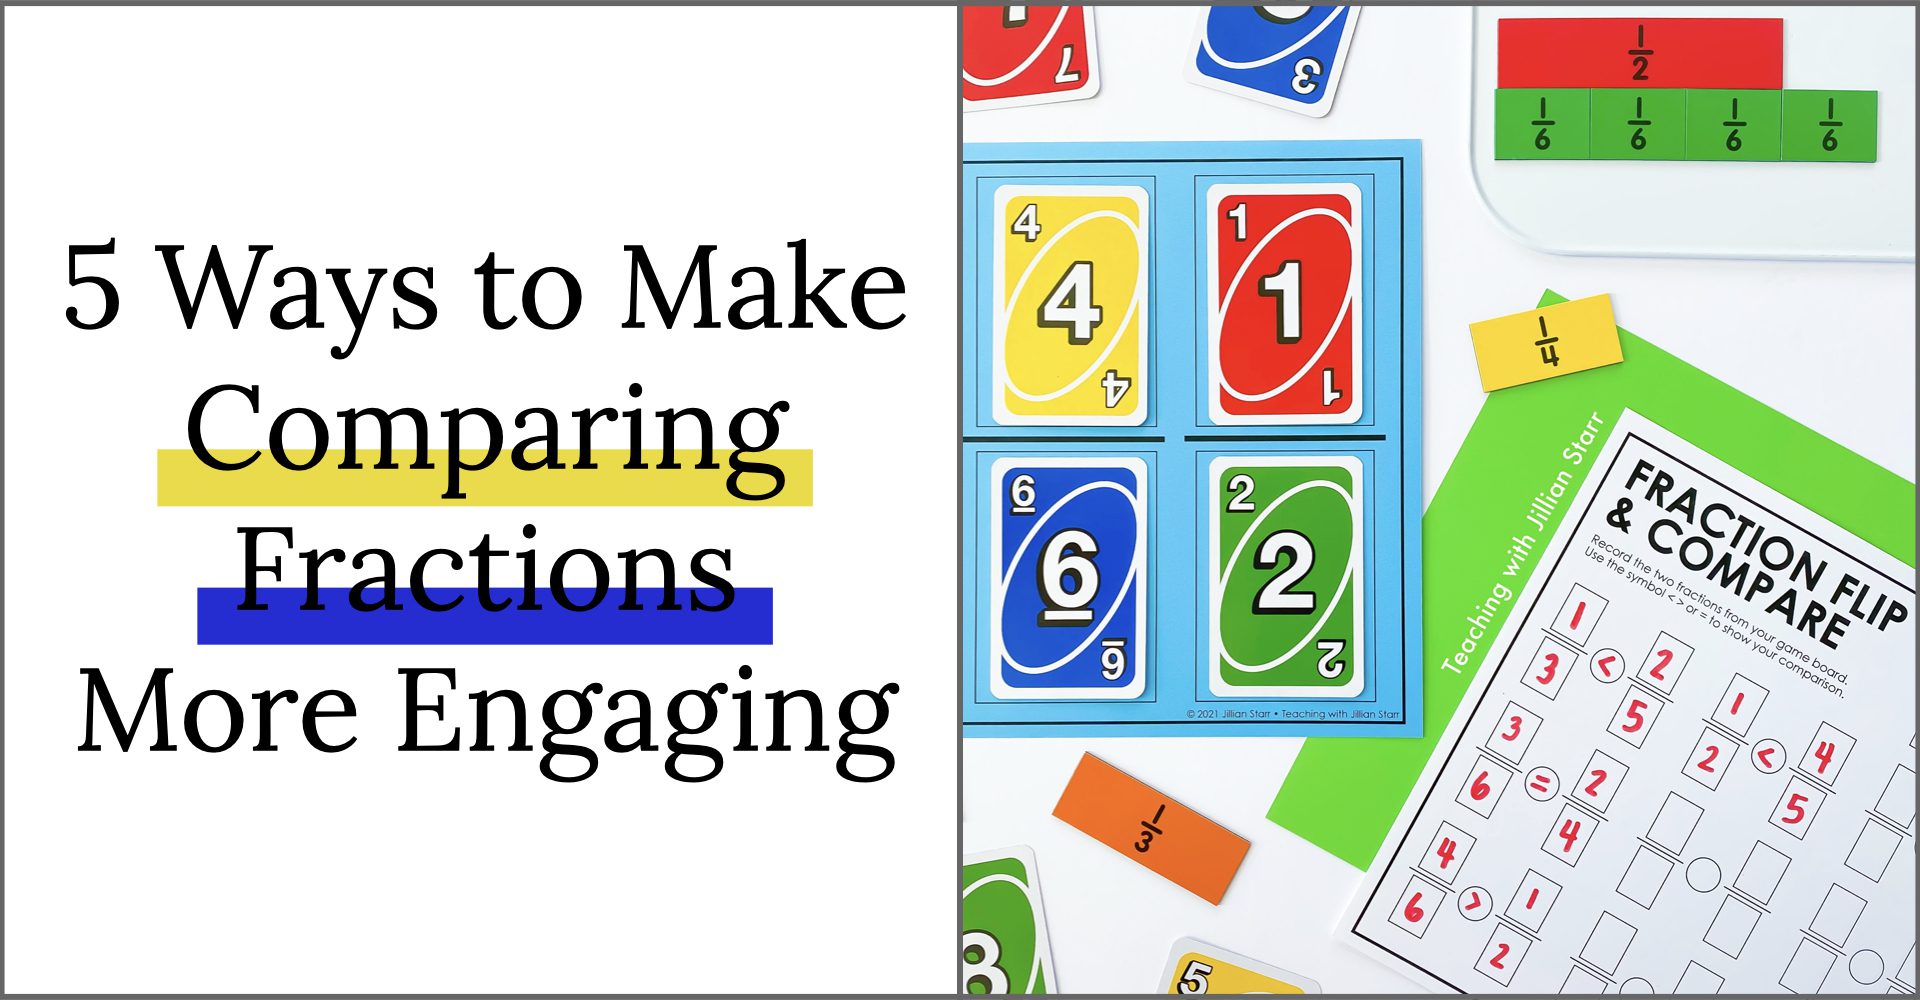 5 ways to make comparing fractions more engaging